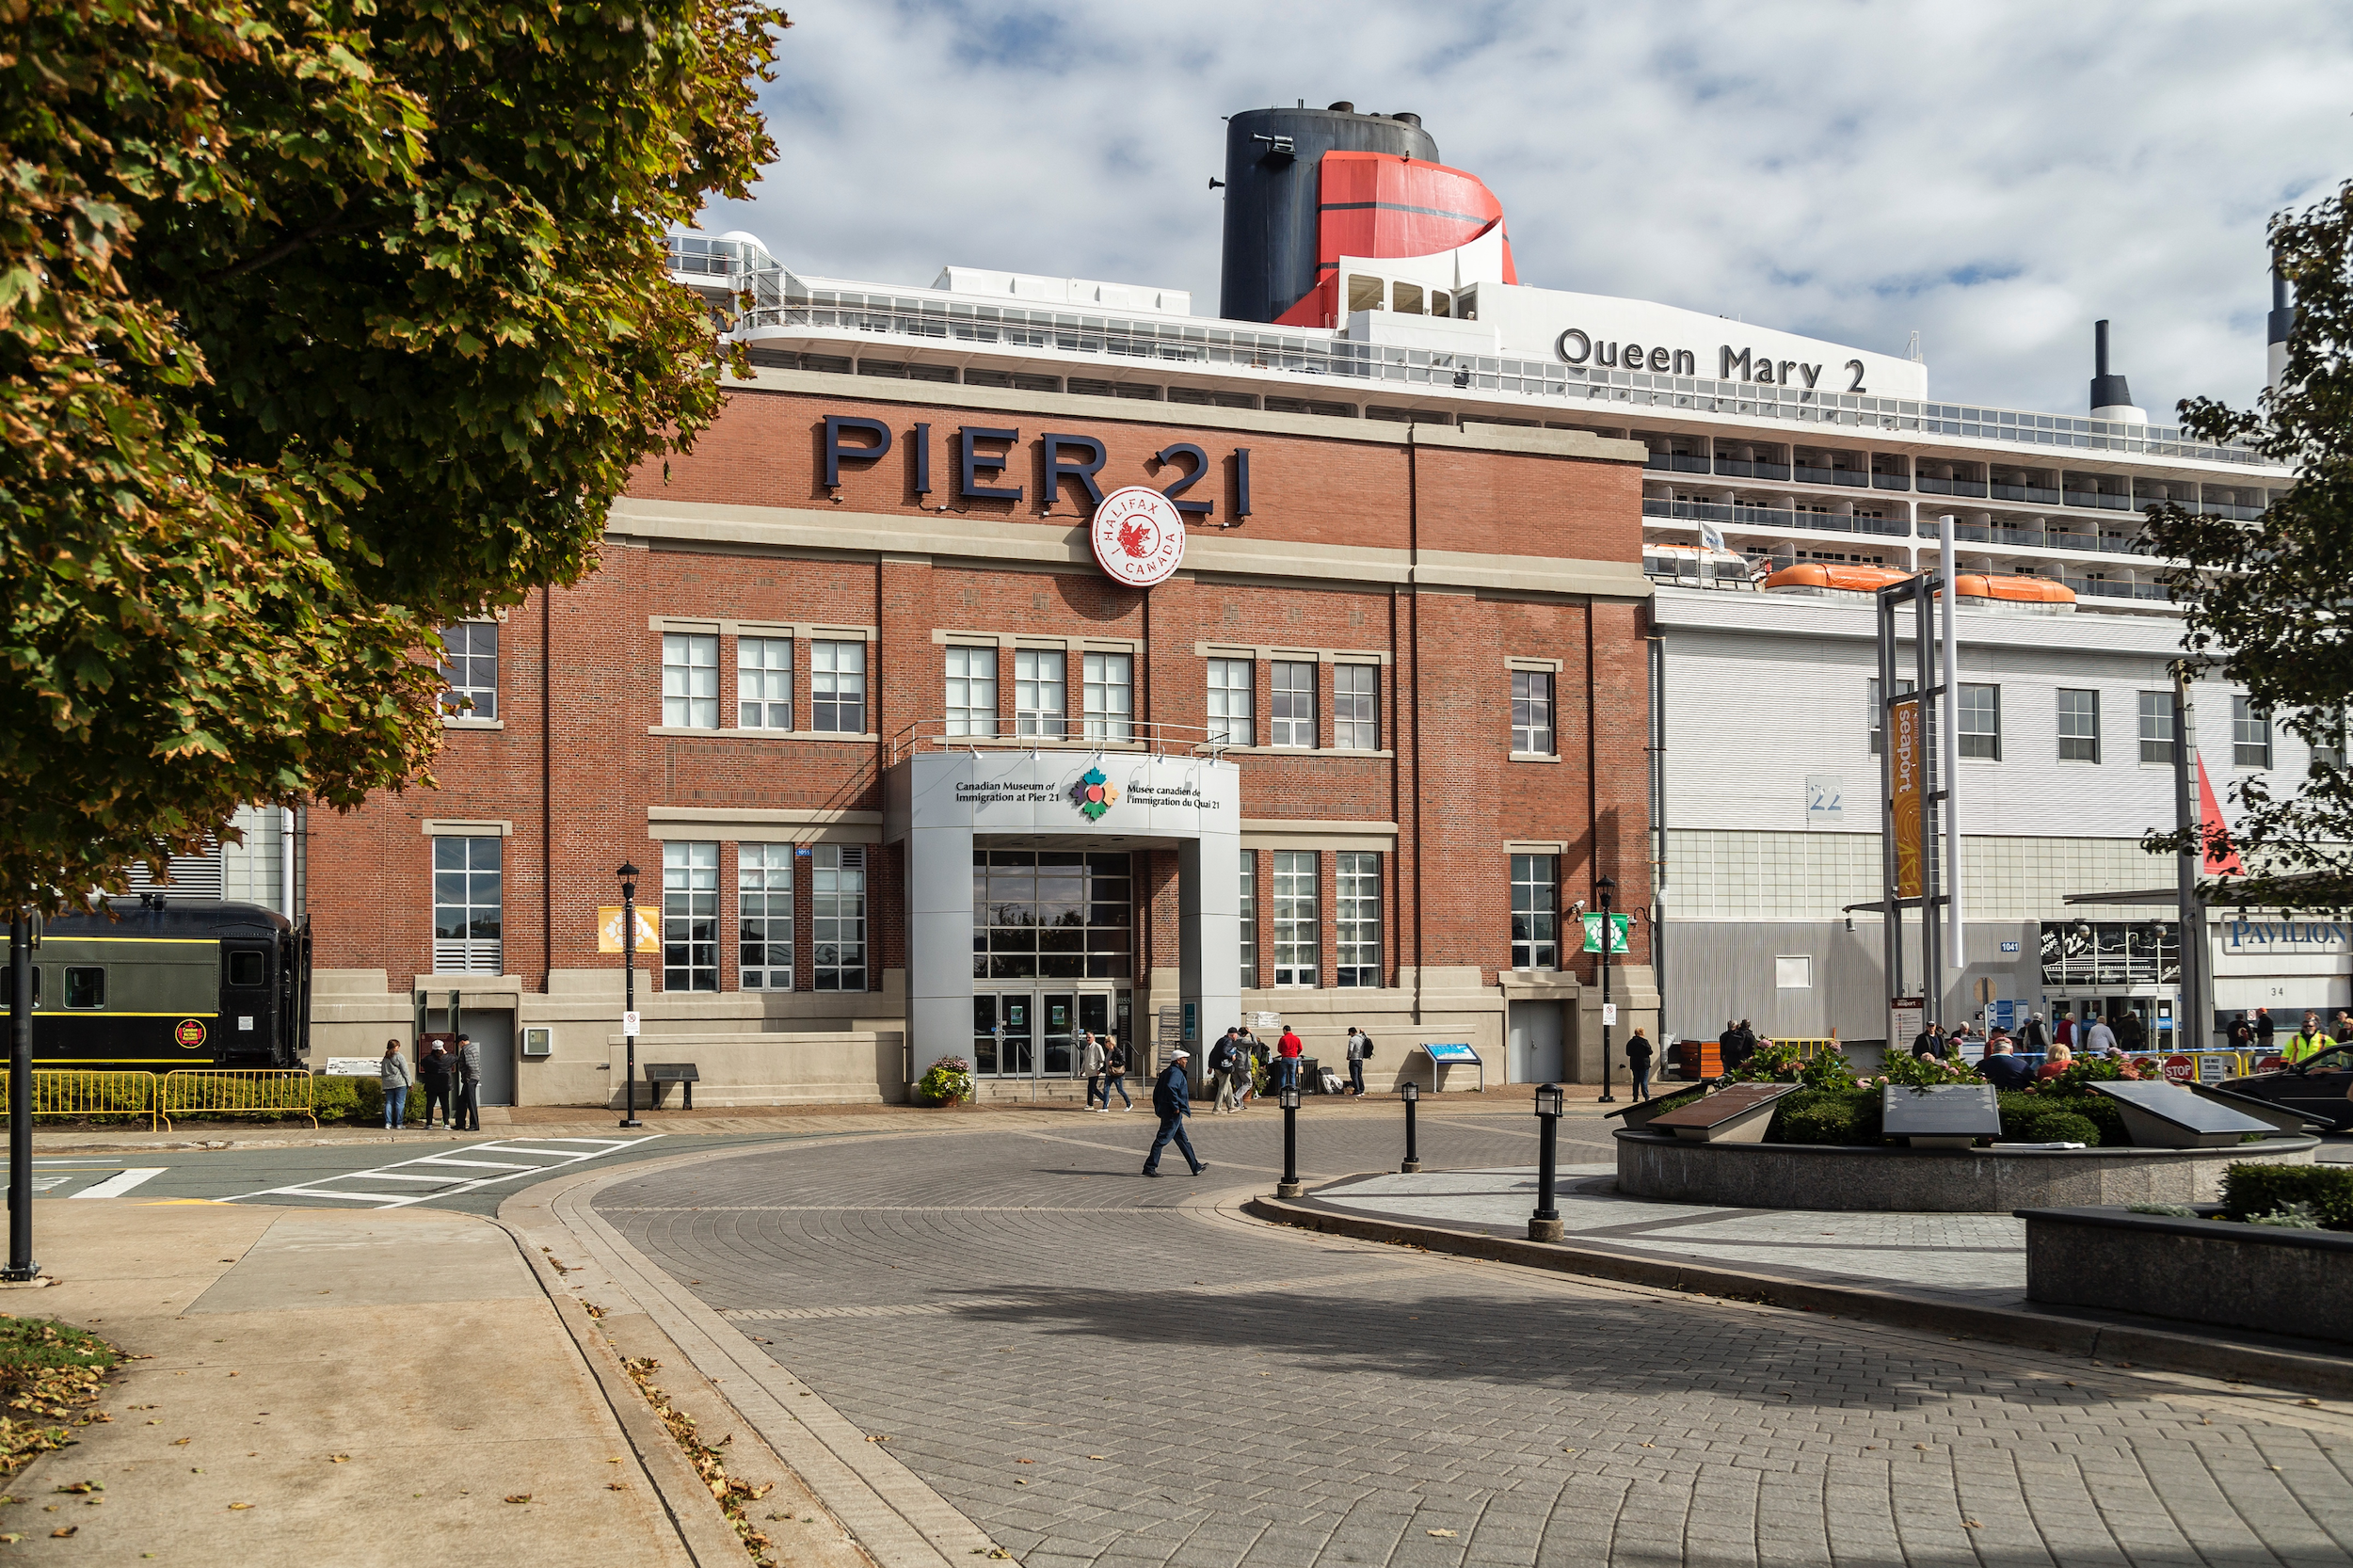 Photo of Pier 21 with Queen Mary